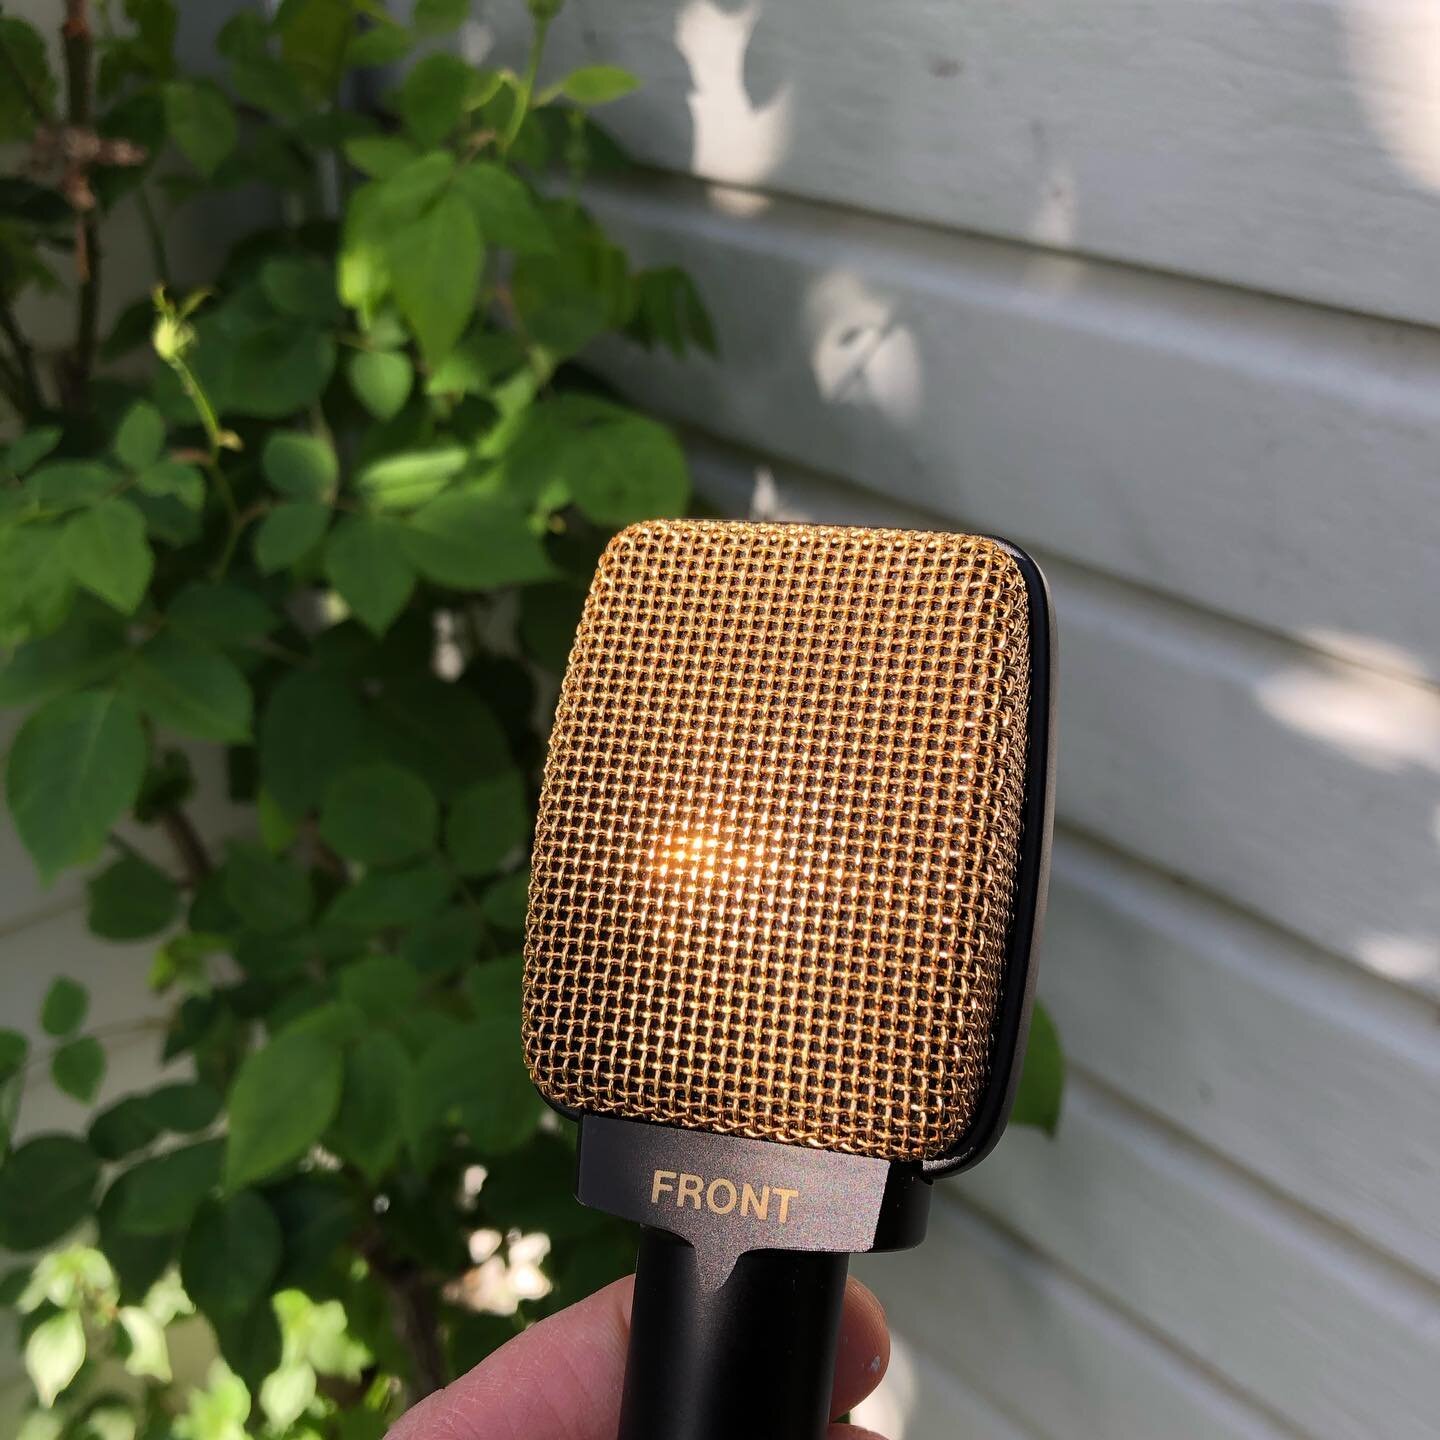 New to El Studio mic locker: Sennheiser MD409 U3 cardioid side-address dynamic microphone. Found for cheap on eBay. Interior foam had deteriorated, which is inevitable with mics of this vintage, and wires had broken off inside microphone. Half an hou